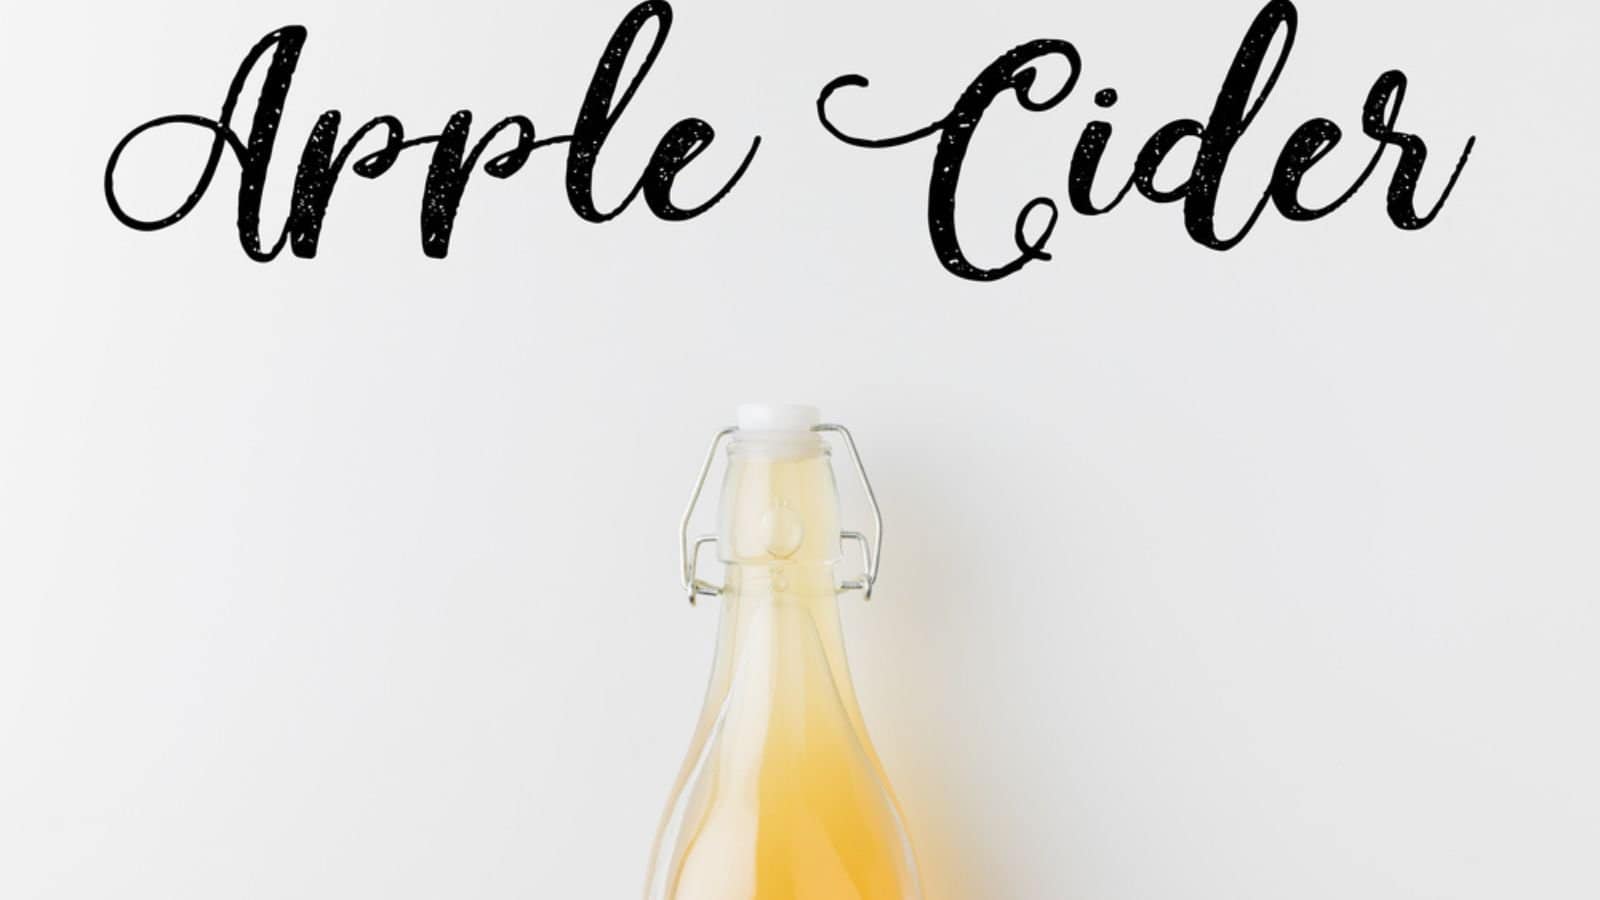 Bottle of apple cider with hand written lettering